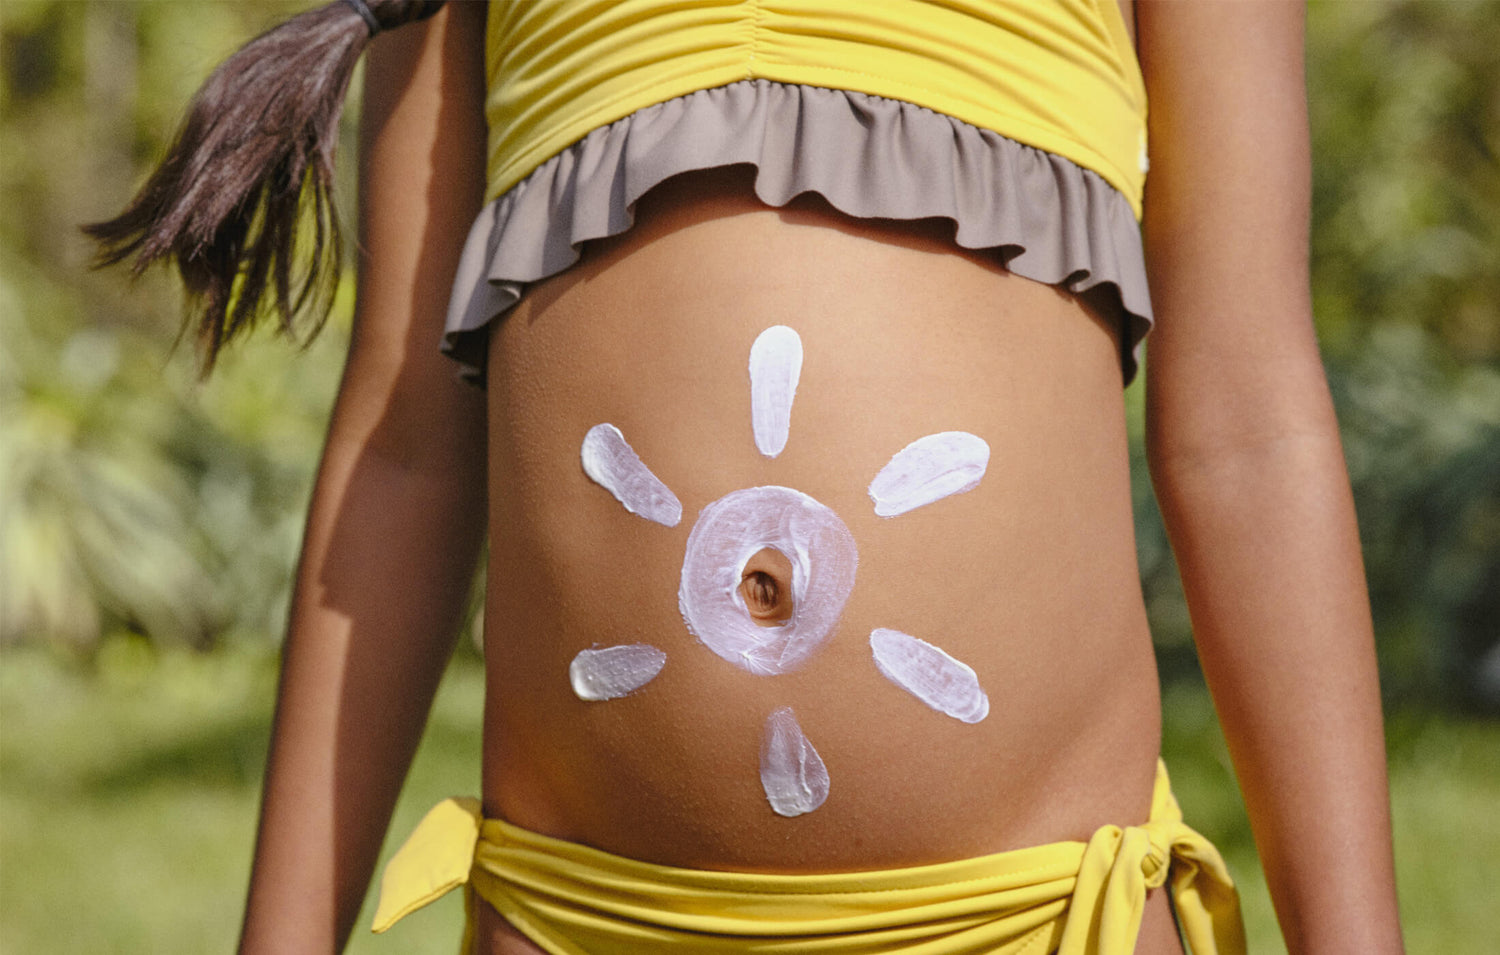 Kid drawing a sun using sunscreen on her belly.